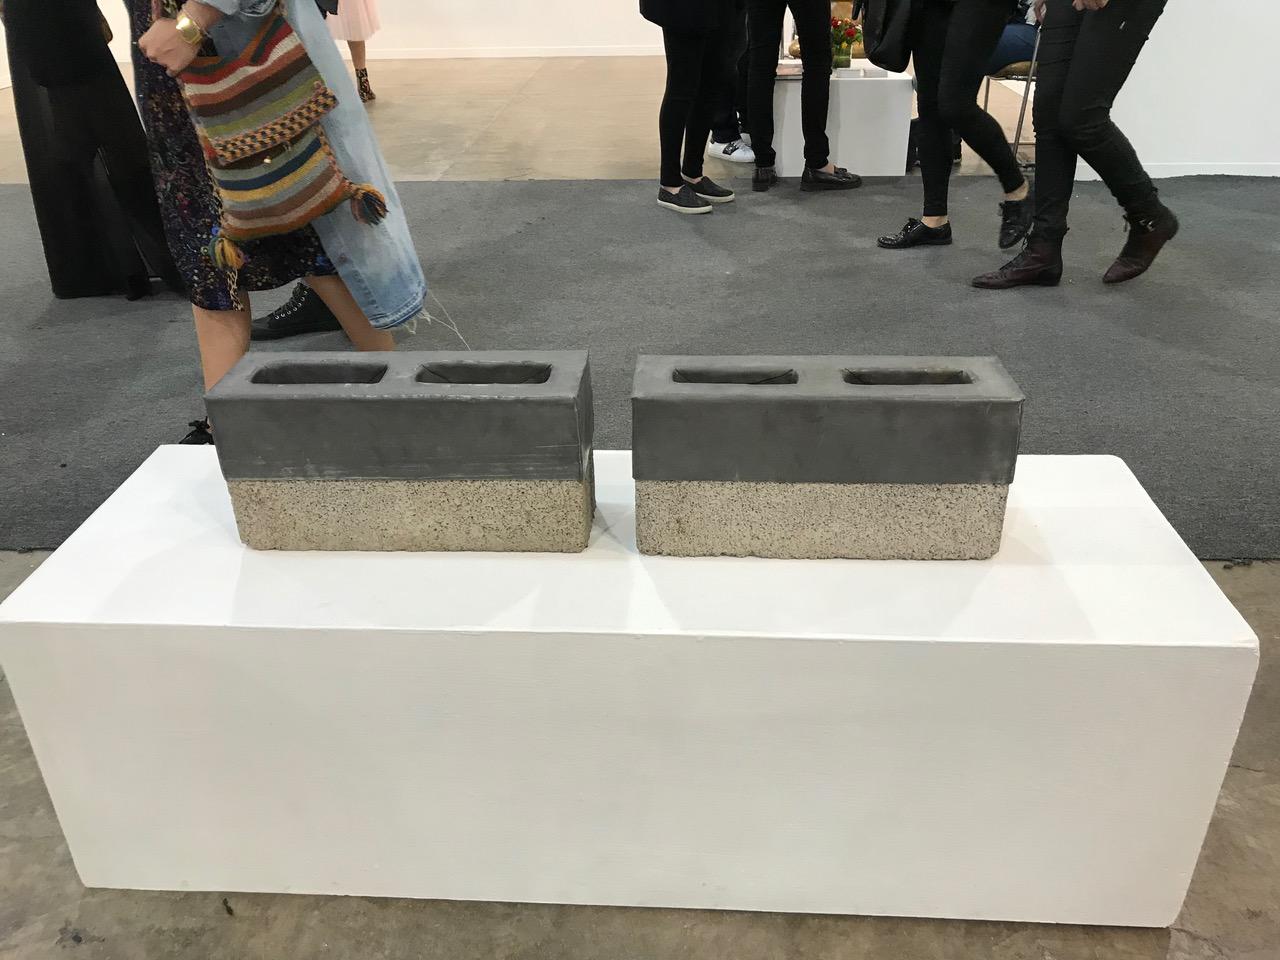 Ash and lead blocks. 
Piece made of 3 blocks 
Exhibited at the International Art Fair, Zona Maco 2019 in Mexico City.
Exhibited at Mana Contemporary at Jersey City, New Jersey in 2018. 
